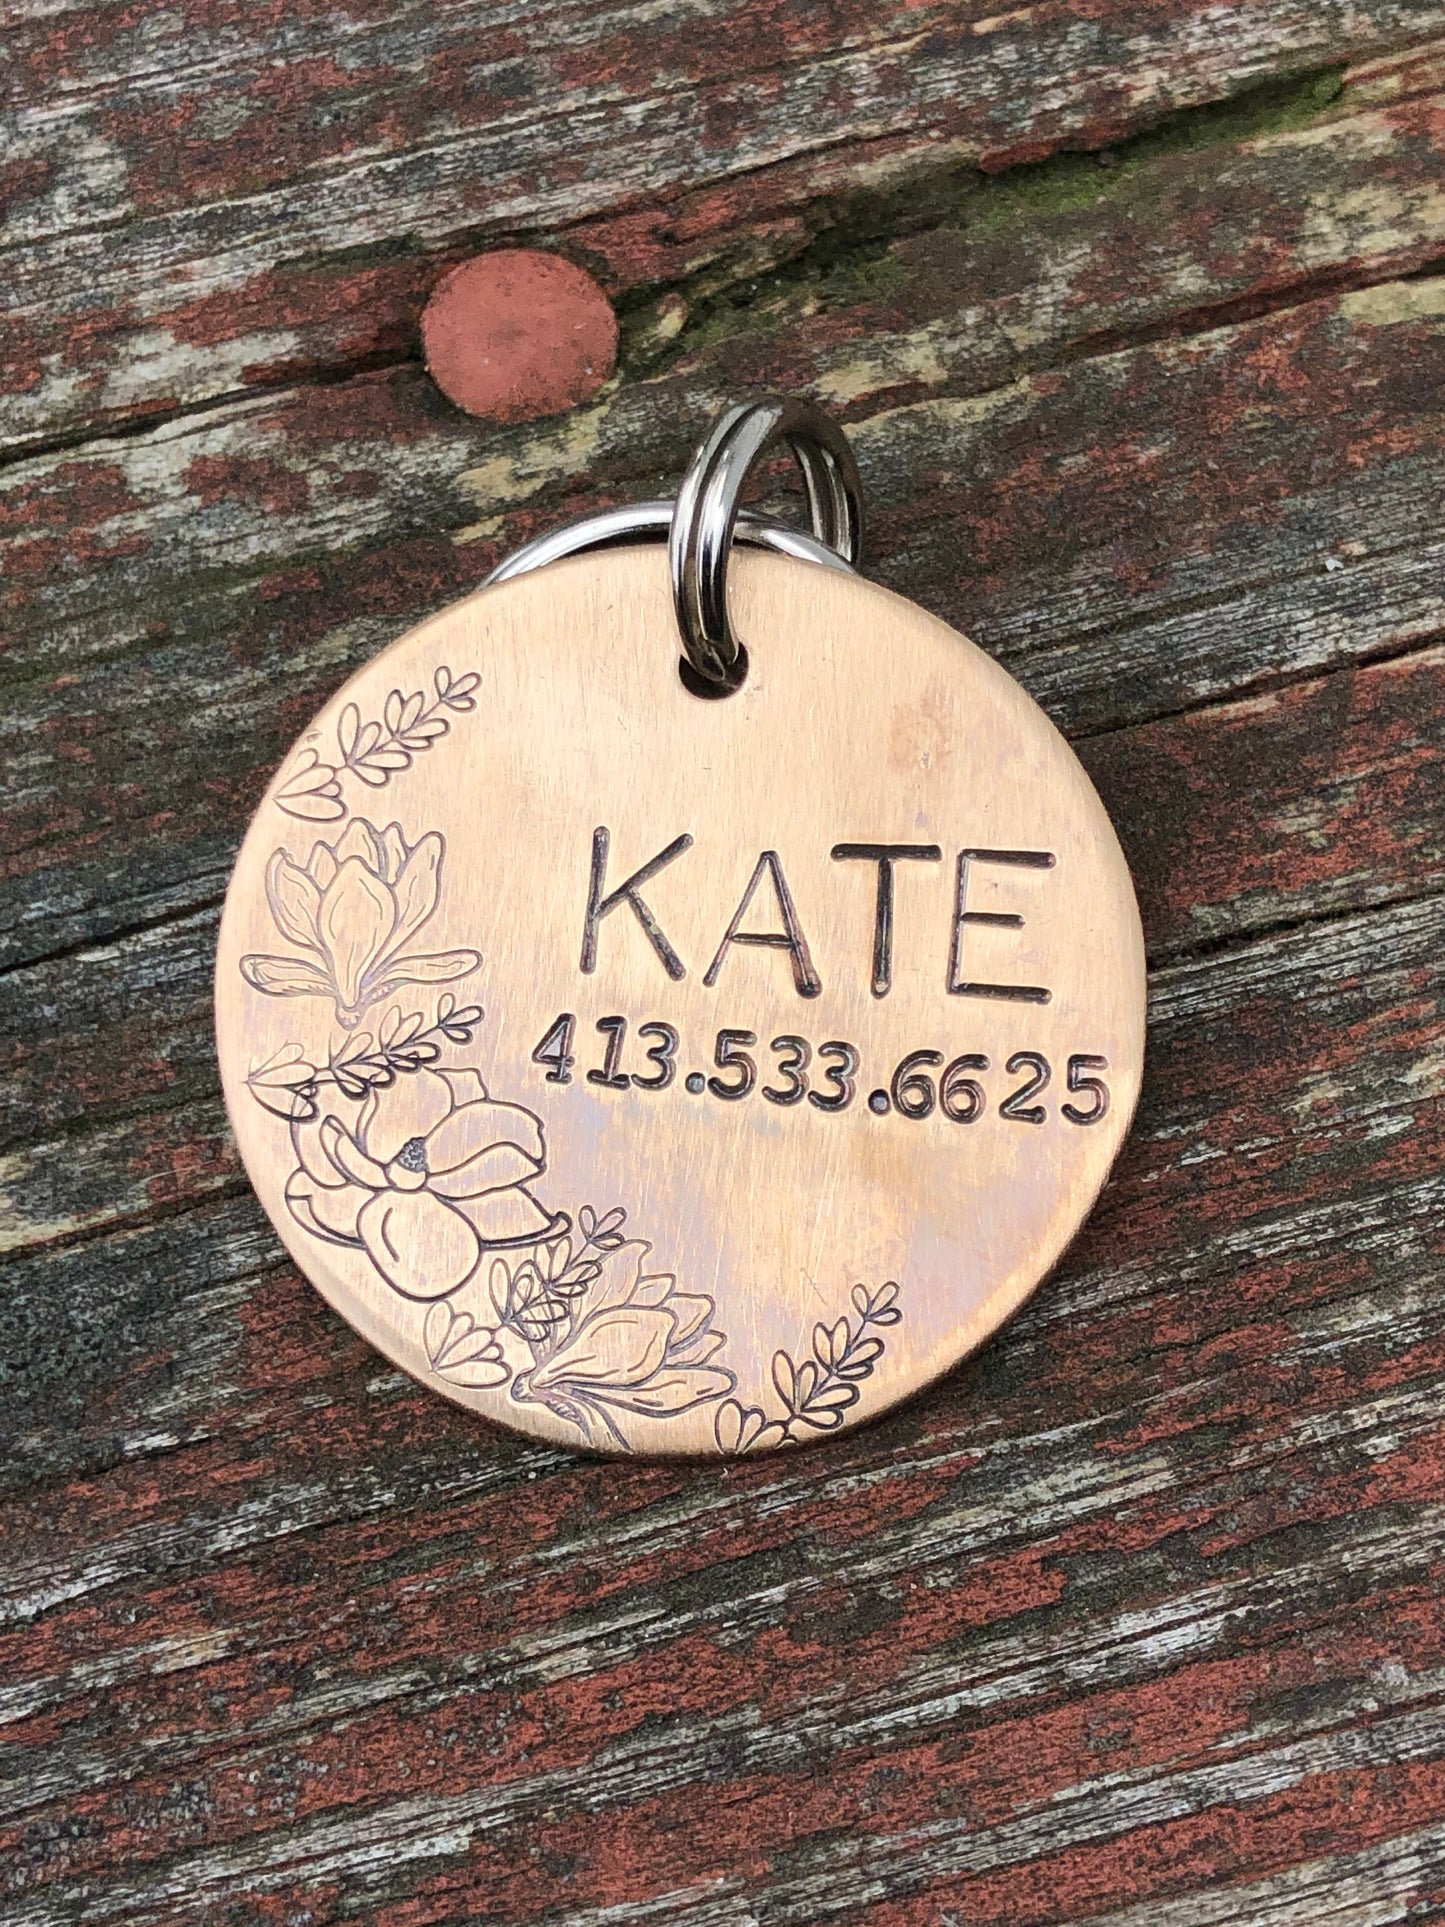 Custom Dog Tag, Dog Tag for Dogs, Floral Dog Tag, Dog Tag with Flowers, Magnolias, Hand Stamped Pet ID Tag, Kate